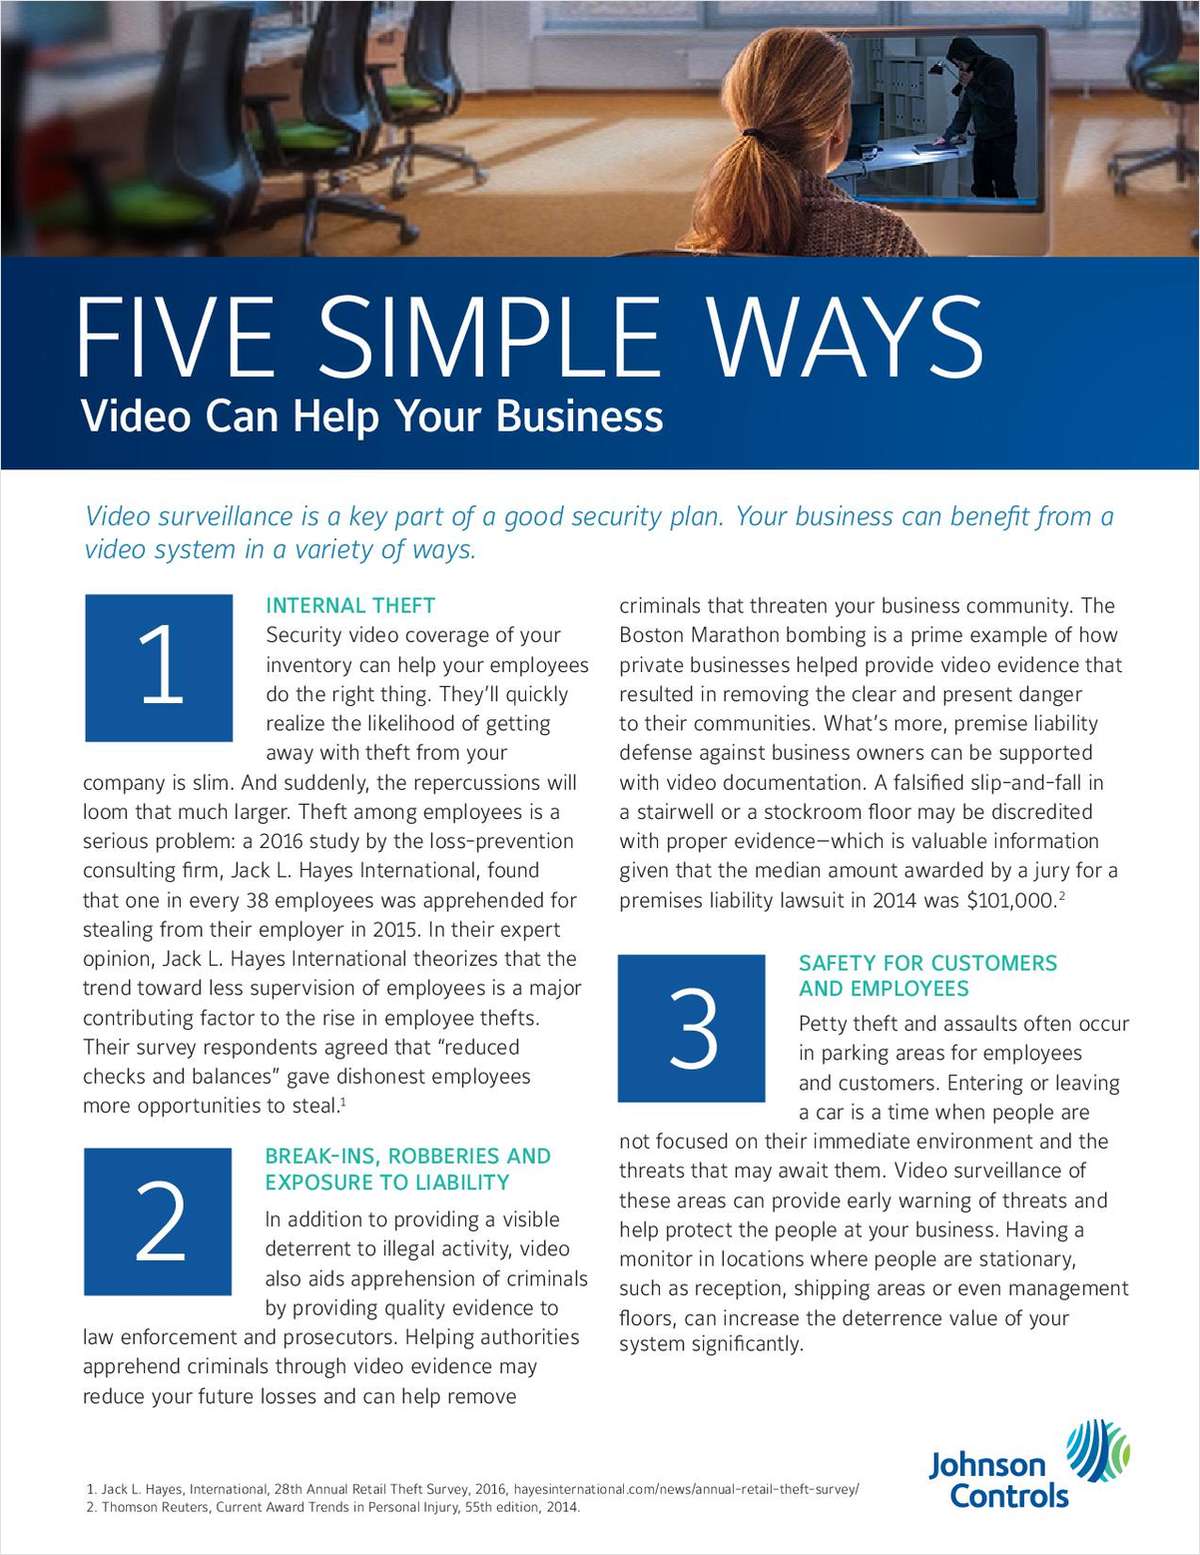 See How Video Can Help Your Business